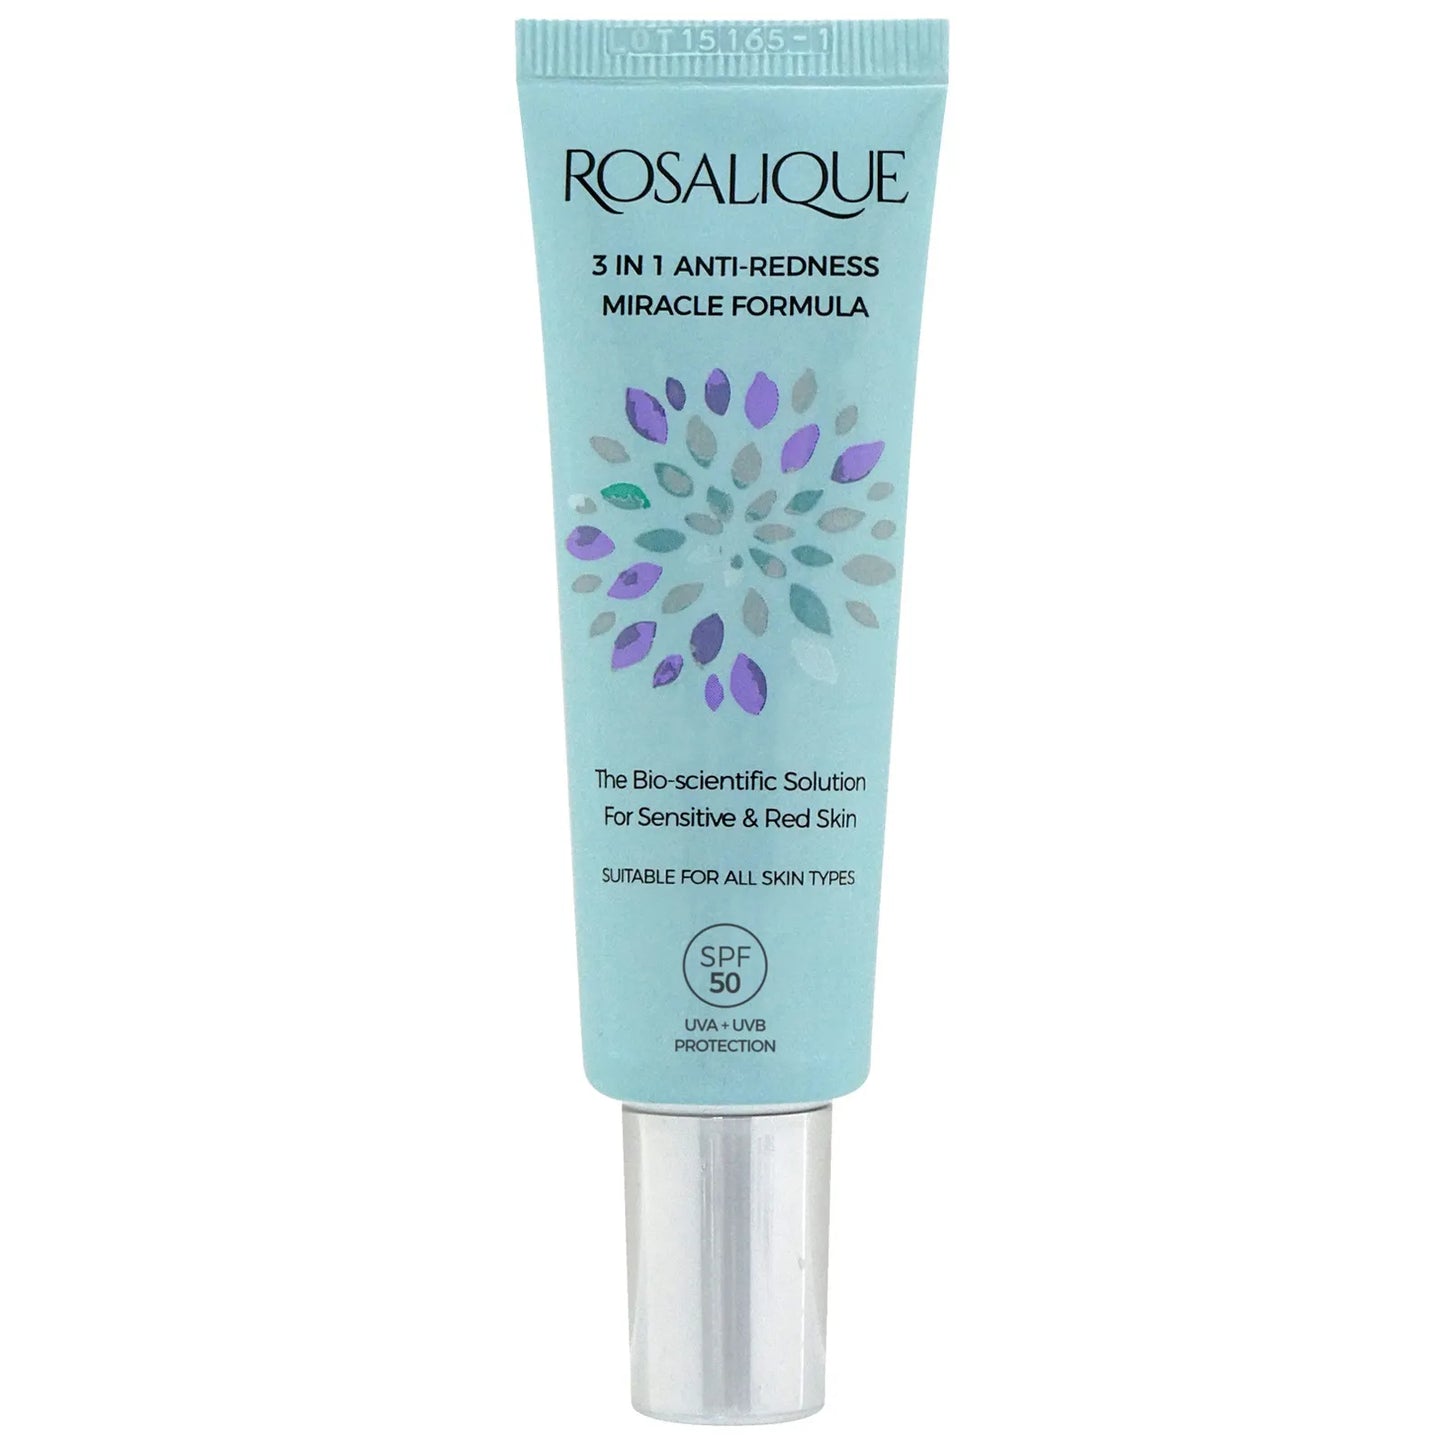 ROSALIQUE 3 in 1 Anti-Redness SPF50 Miracle Formula 30mL